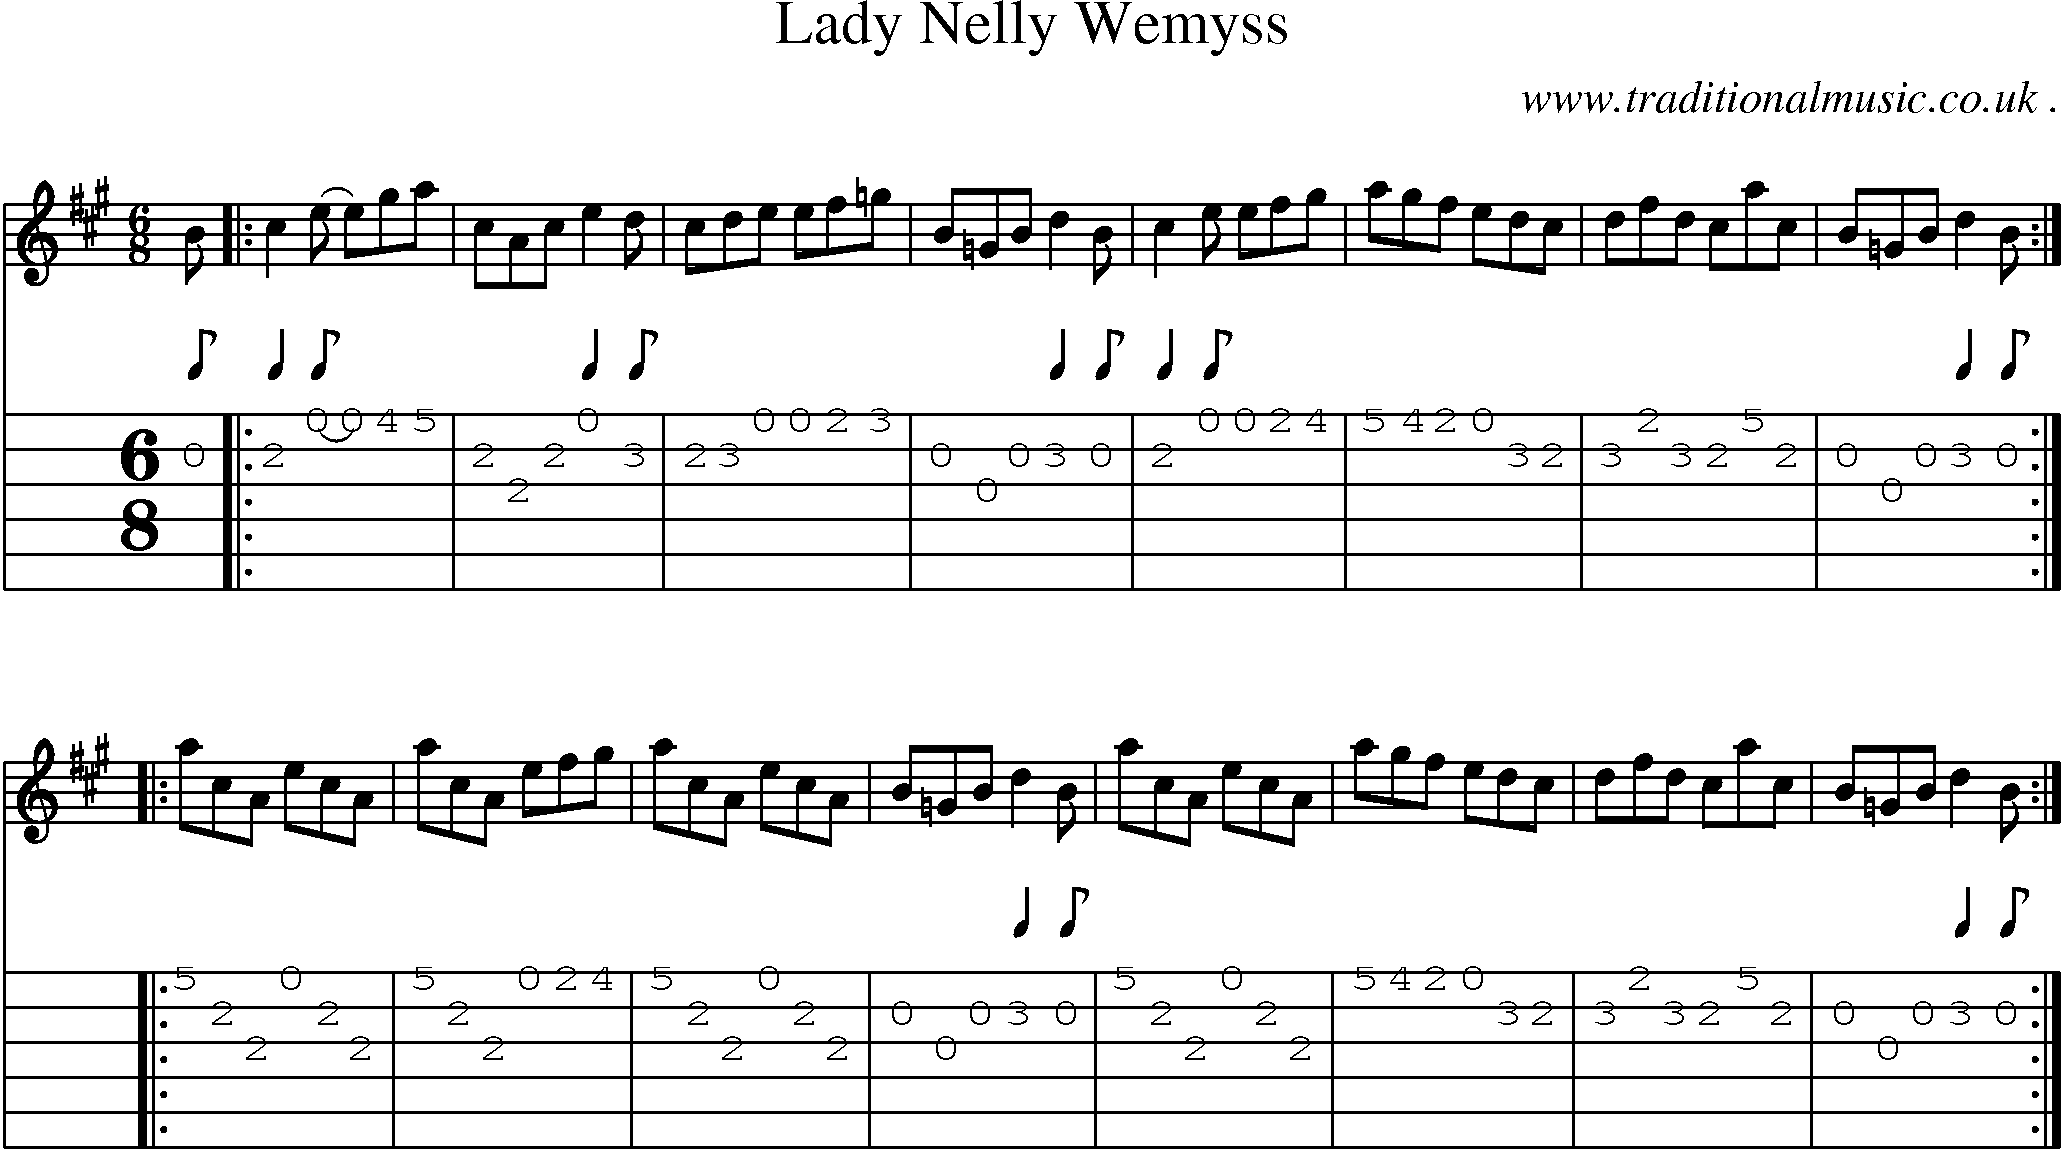 Sheet-music  score, Chords and Guitar Tabs for Lady Nelly Wemyss